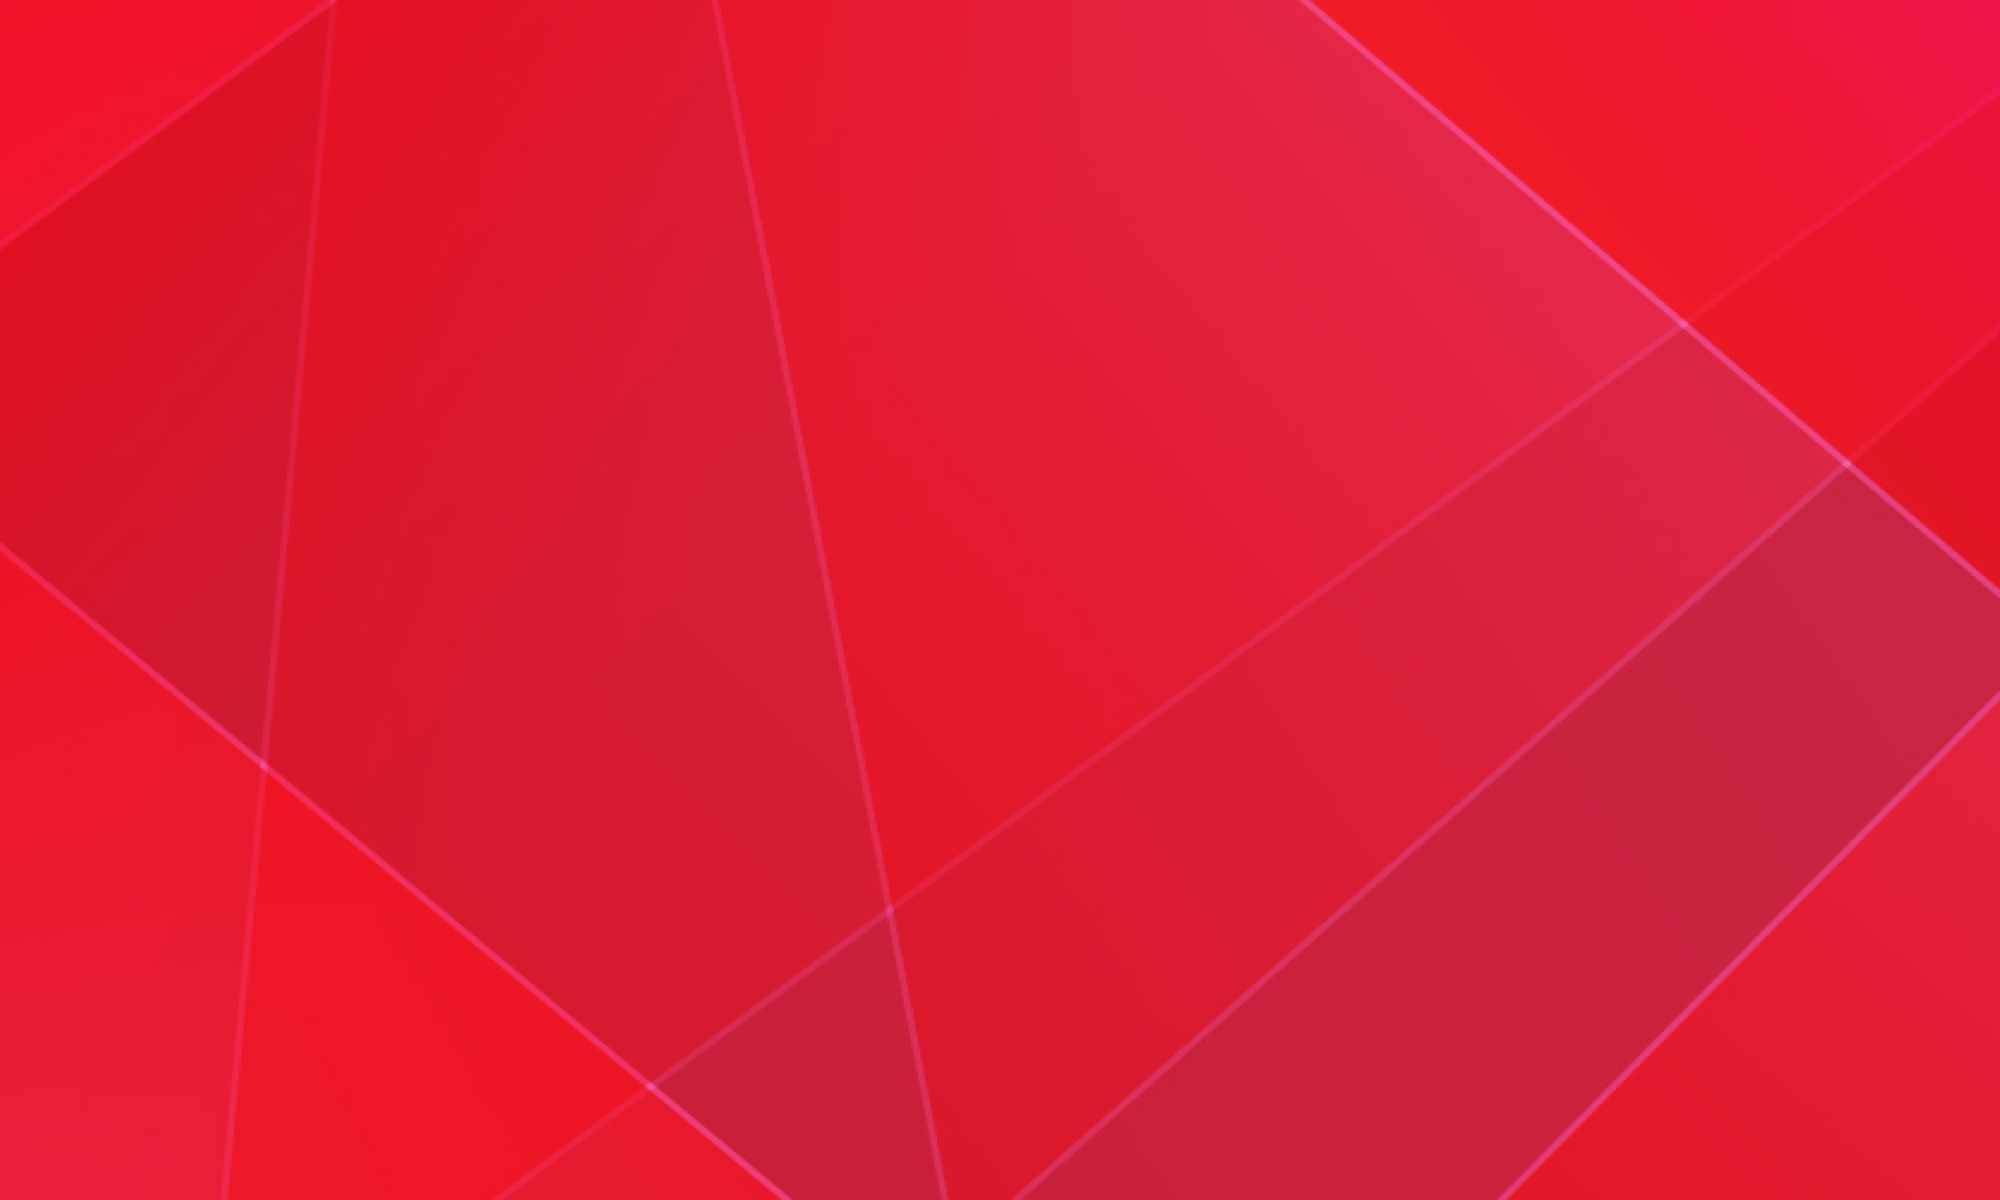 Generic red banner